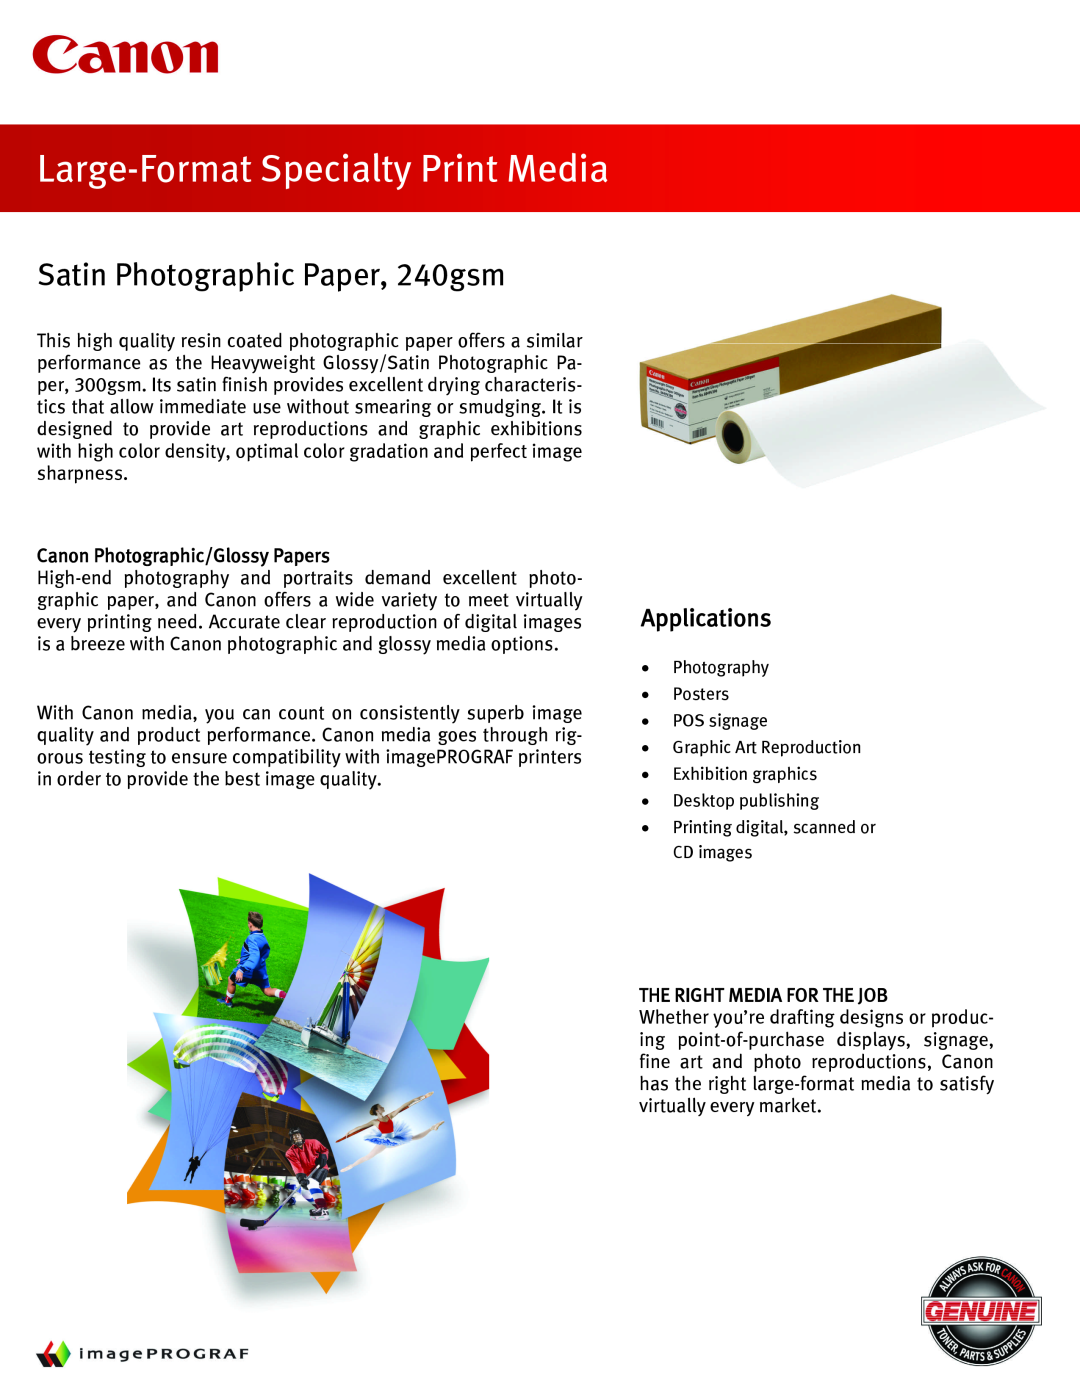 Canon Printer Accessories manual Satin Photographic Paper, 240gsm, Large-Format Specialty Print Media, Applications 